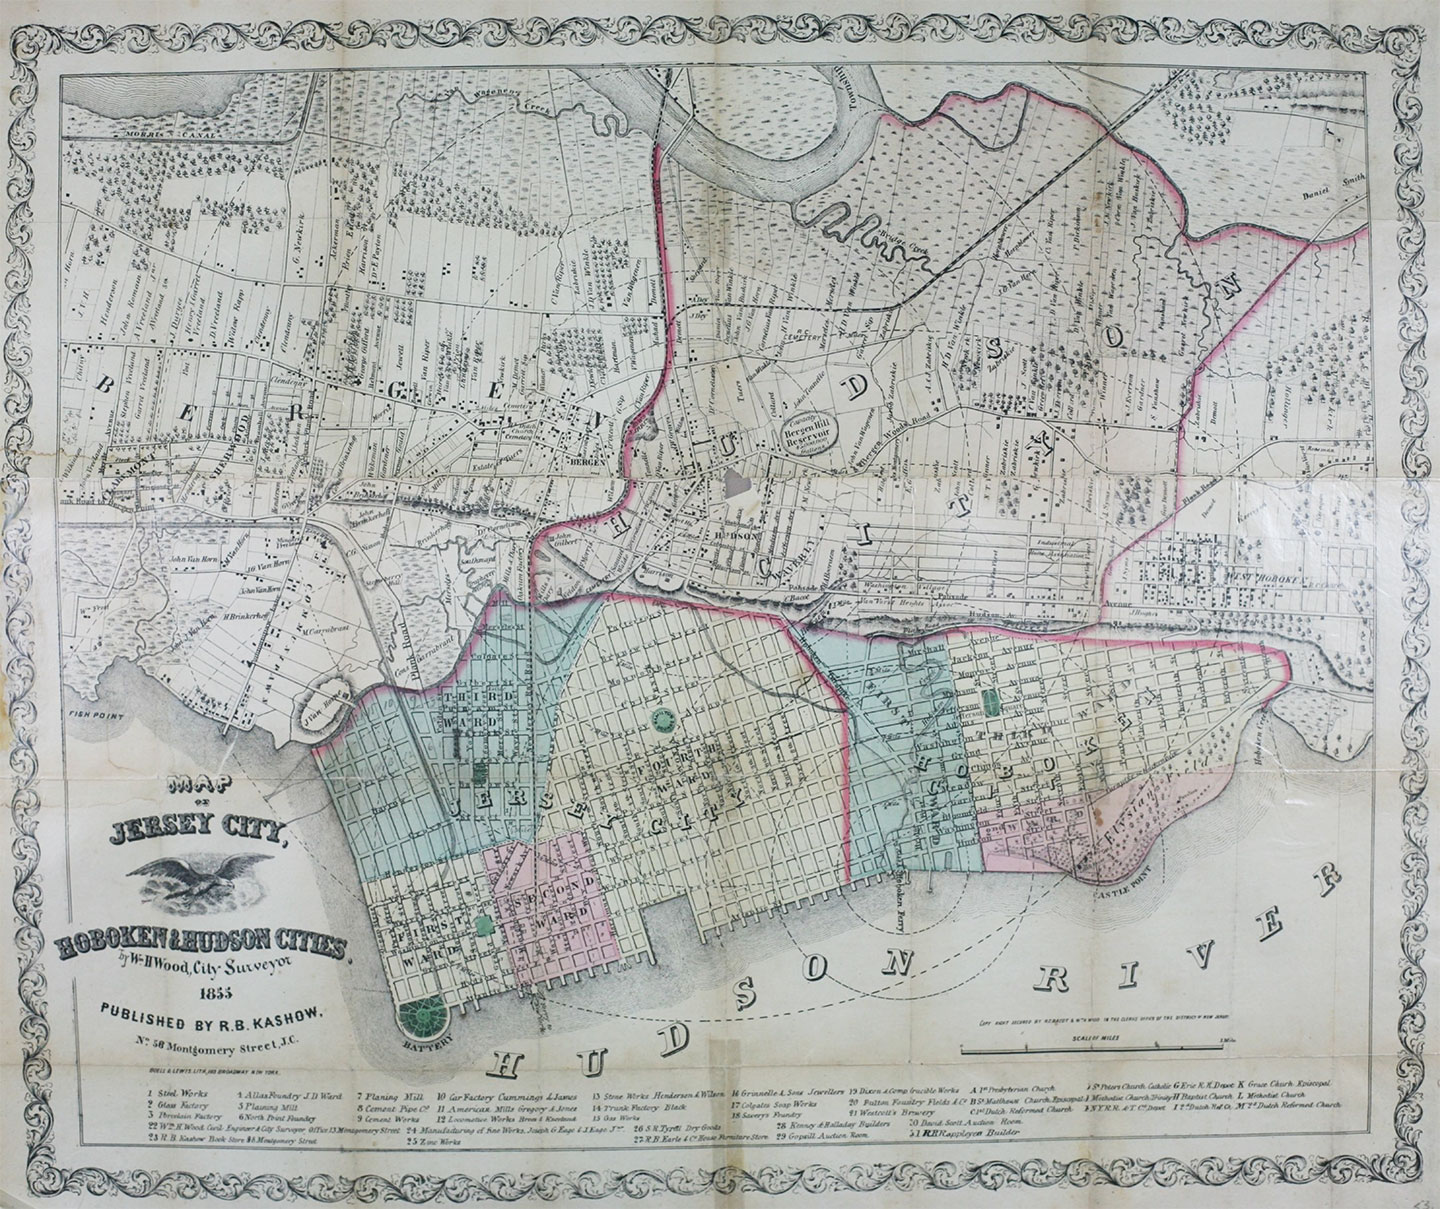 Jersey City 1855 Woods Map smaller